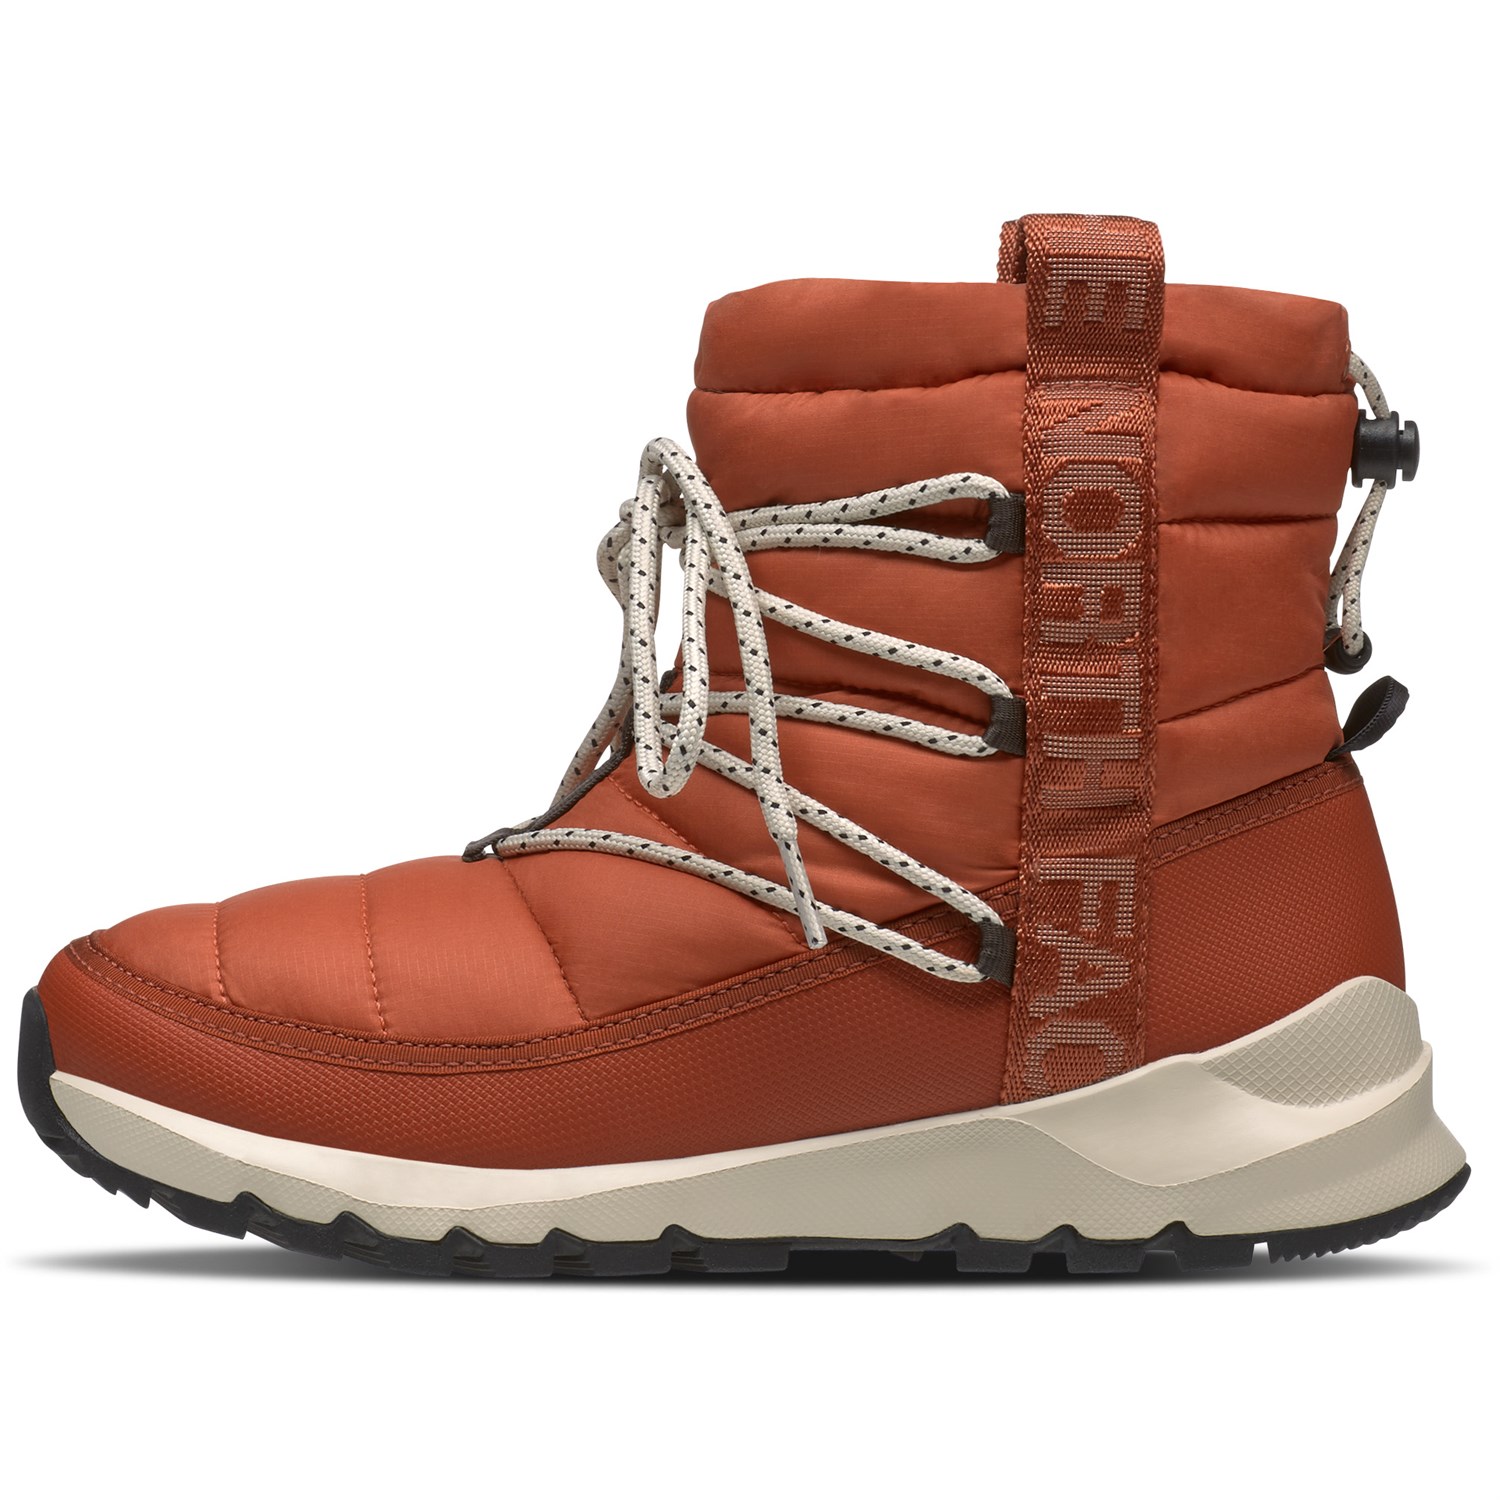 Perversion Who adverb The North Face Thermoball Lace-Up Boots - Women's | evo Canada